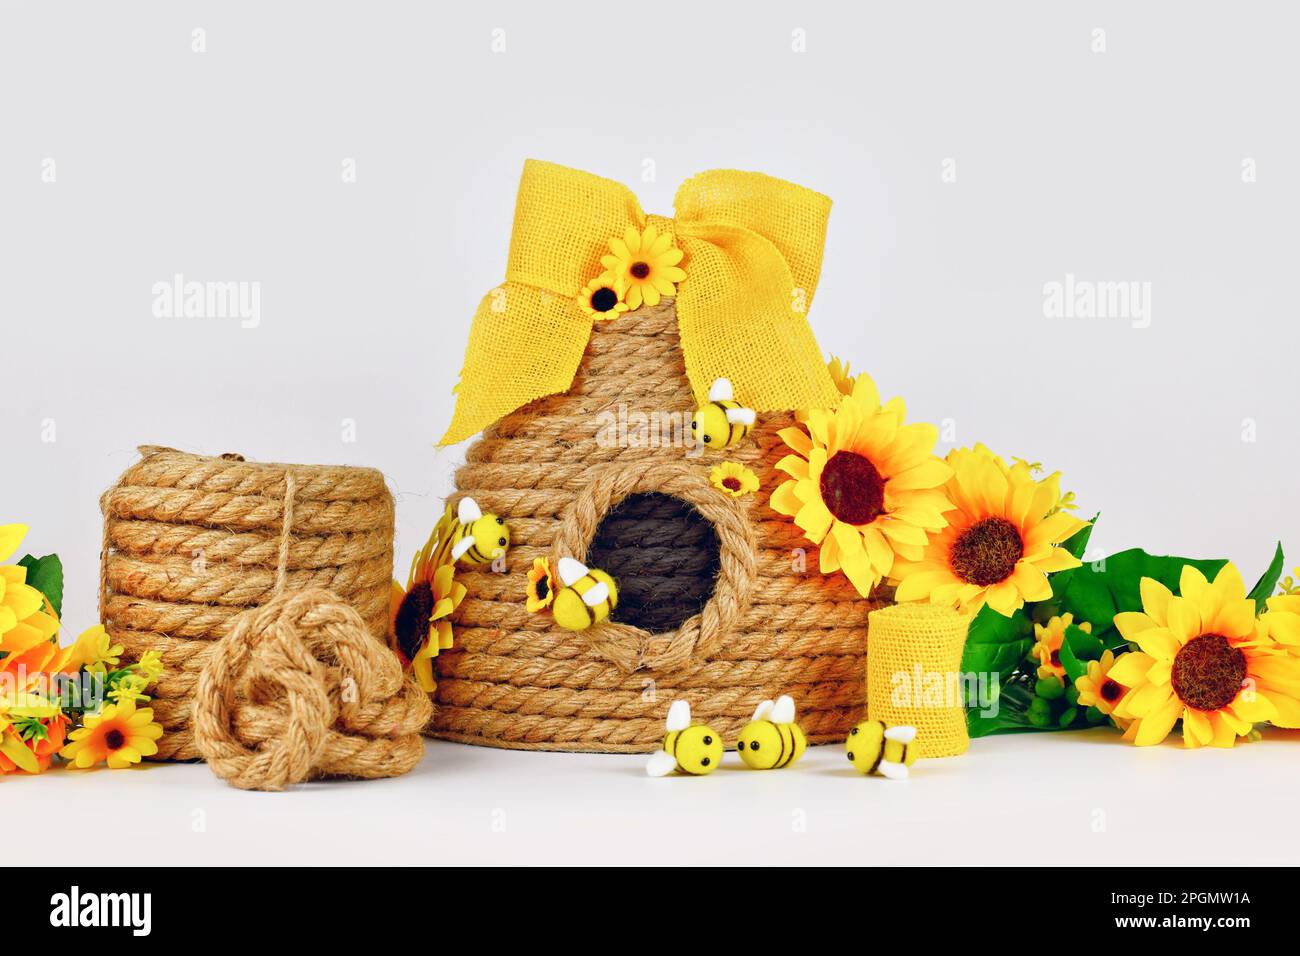 How to Make a Decorative Bee Skep - Celebrate & Decorate